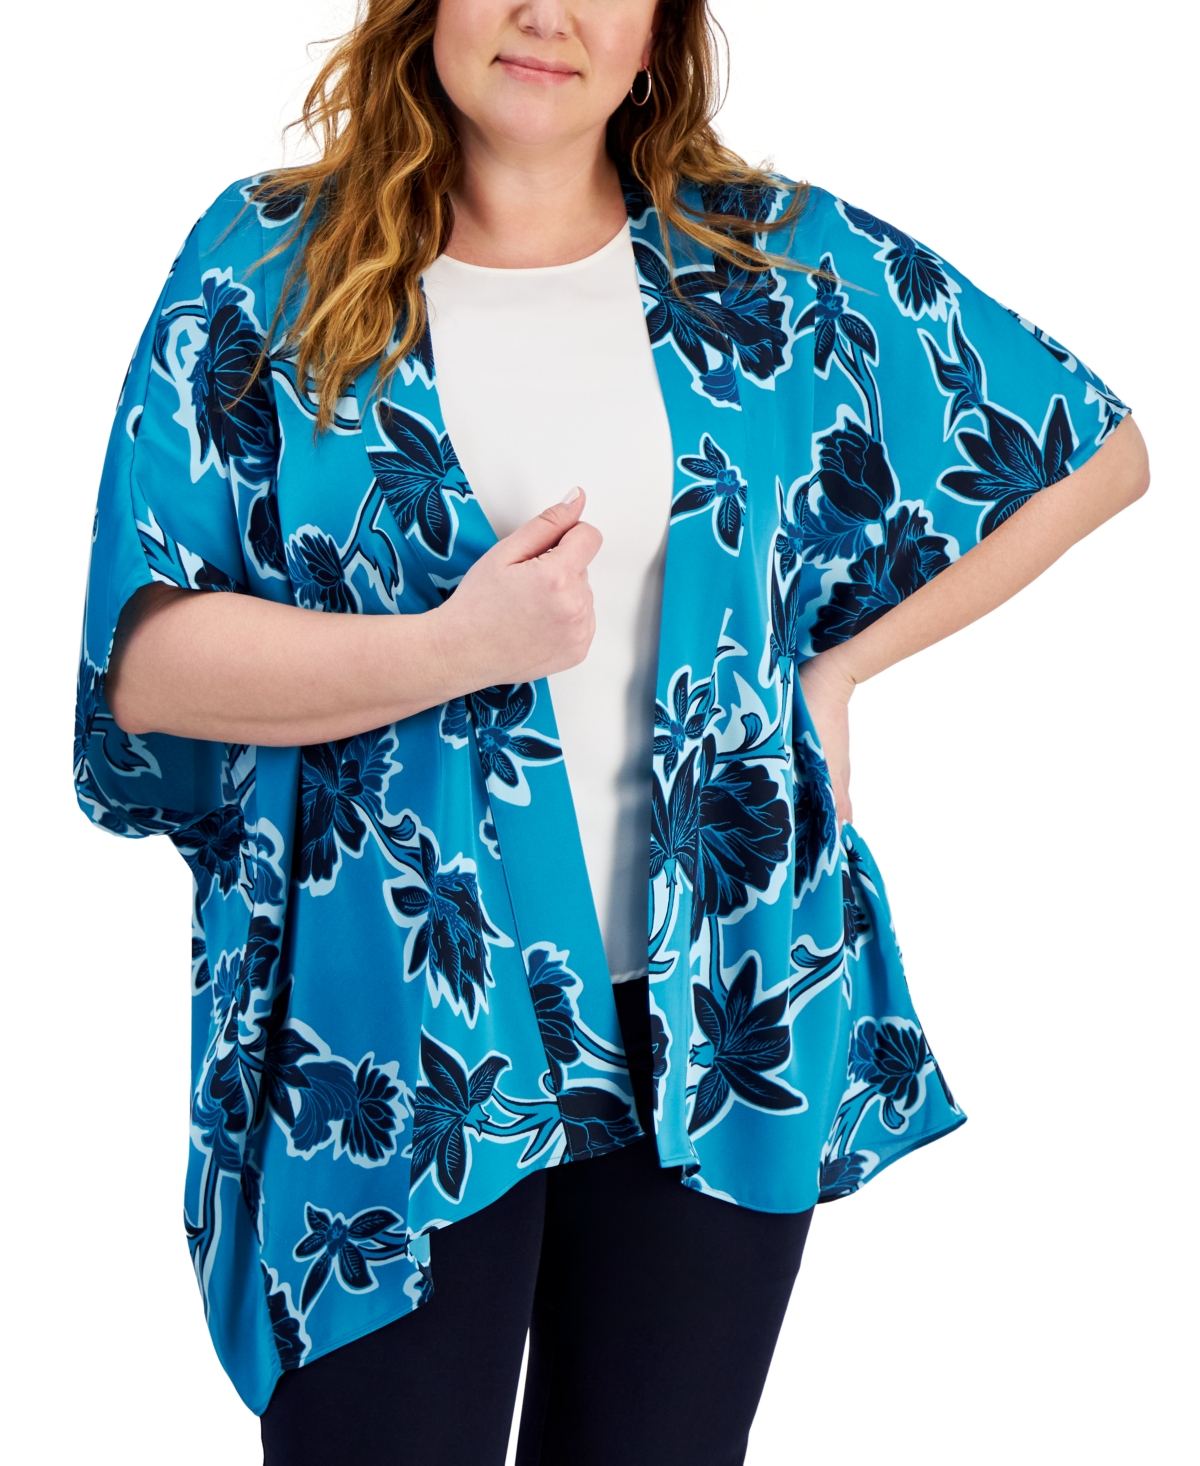 Plus Size Felicia Floral Kimono Jacket, Created for Macy's - Seafrost Combo